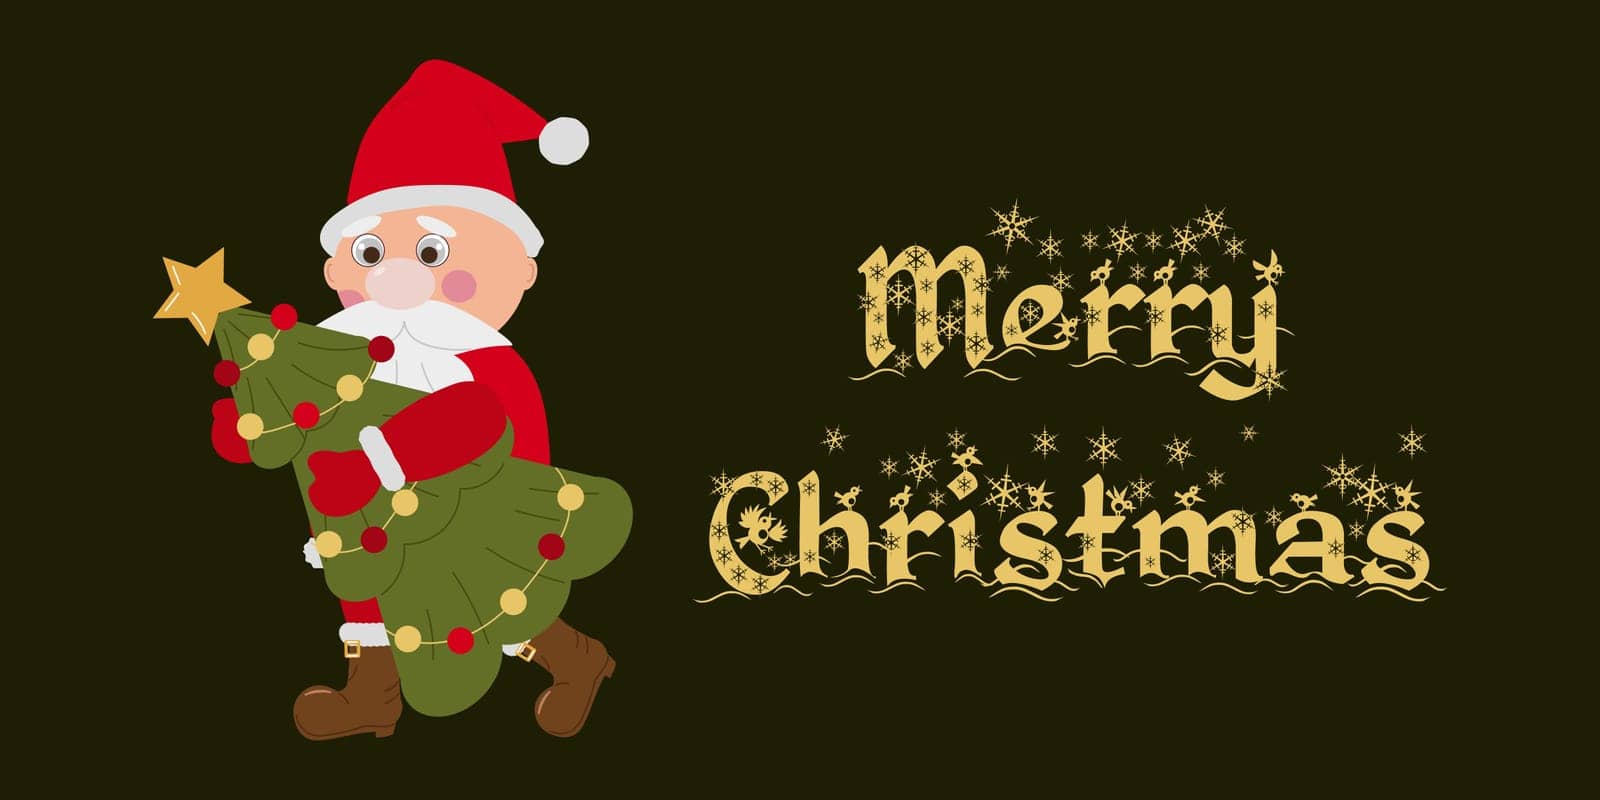 Santa Claus template a festive banner, flyer. Santa Claus is carrying a Christmas tree. Vector illustration.